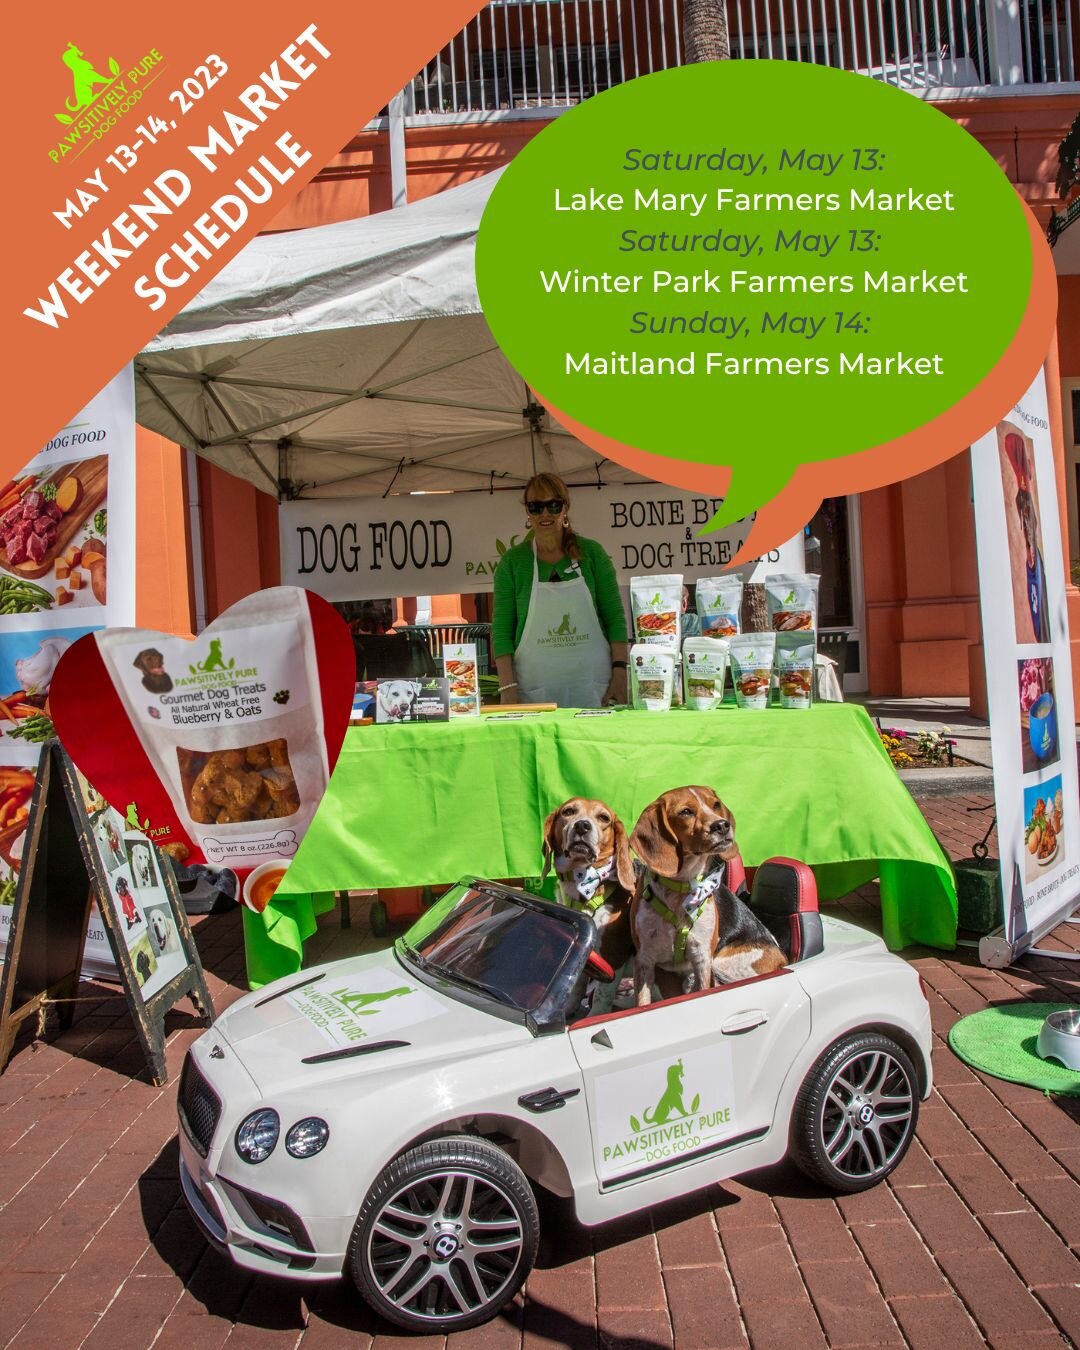 Check out our market schedule for this weekend! 🛍

Bring your dogs along for some fun in the sun and some tasty treat samples!
 
 
 
@farmersmarketwinterpark @lakemaryfarmersmarket @maitlandfarmersmarket #farmersmarket #marketschedule #shoplocal #lo